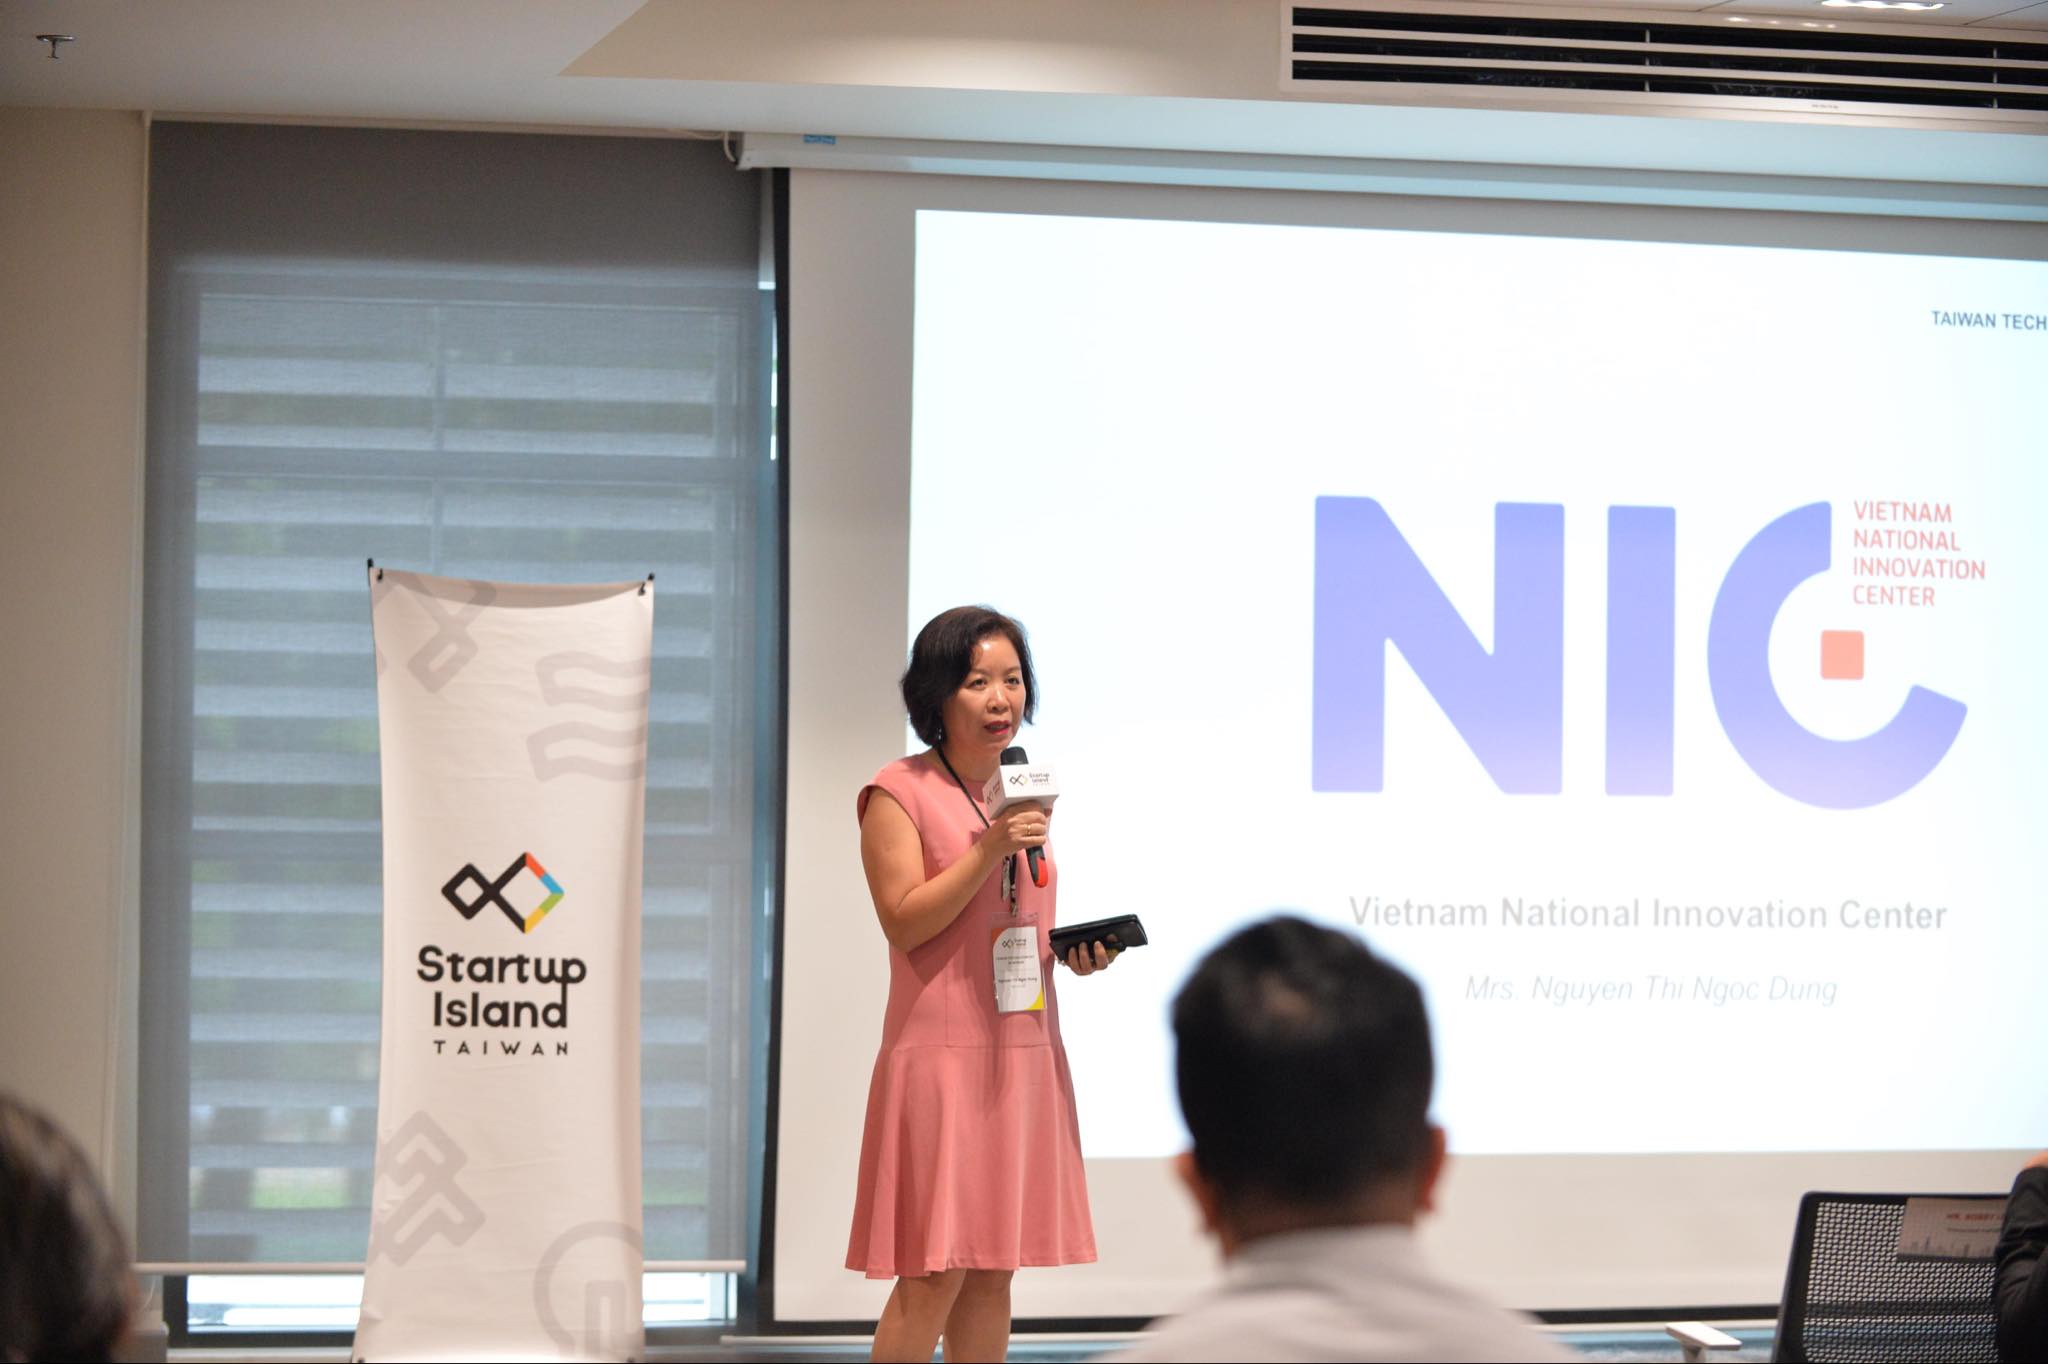 Nguyen Thi Ngoc Dung, a senior expert in research and development at Vietnam National Innovation Center, speaks at the Taiwan Tech Solution Day in Ho Chi Minh City, August 23, 2023. Photo: Startup Island Taiwan